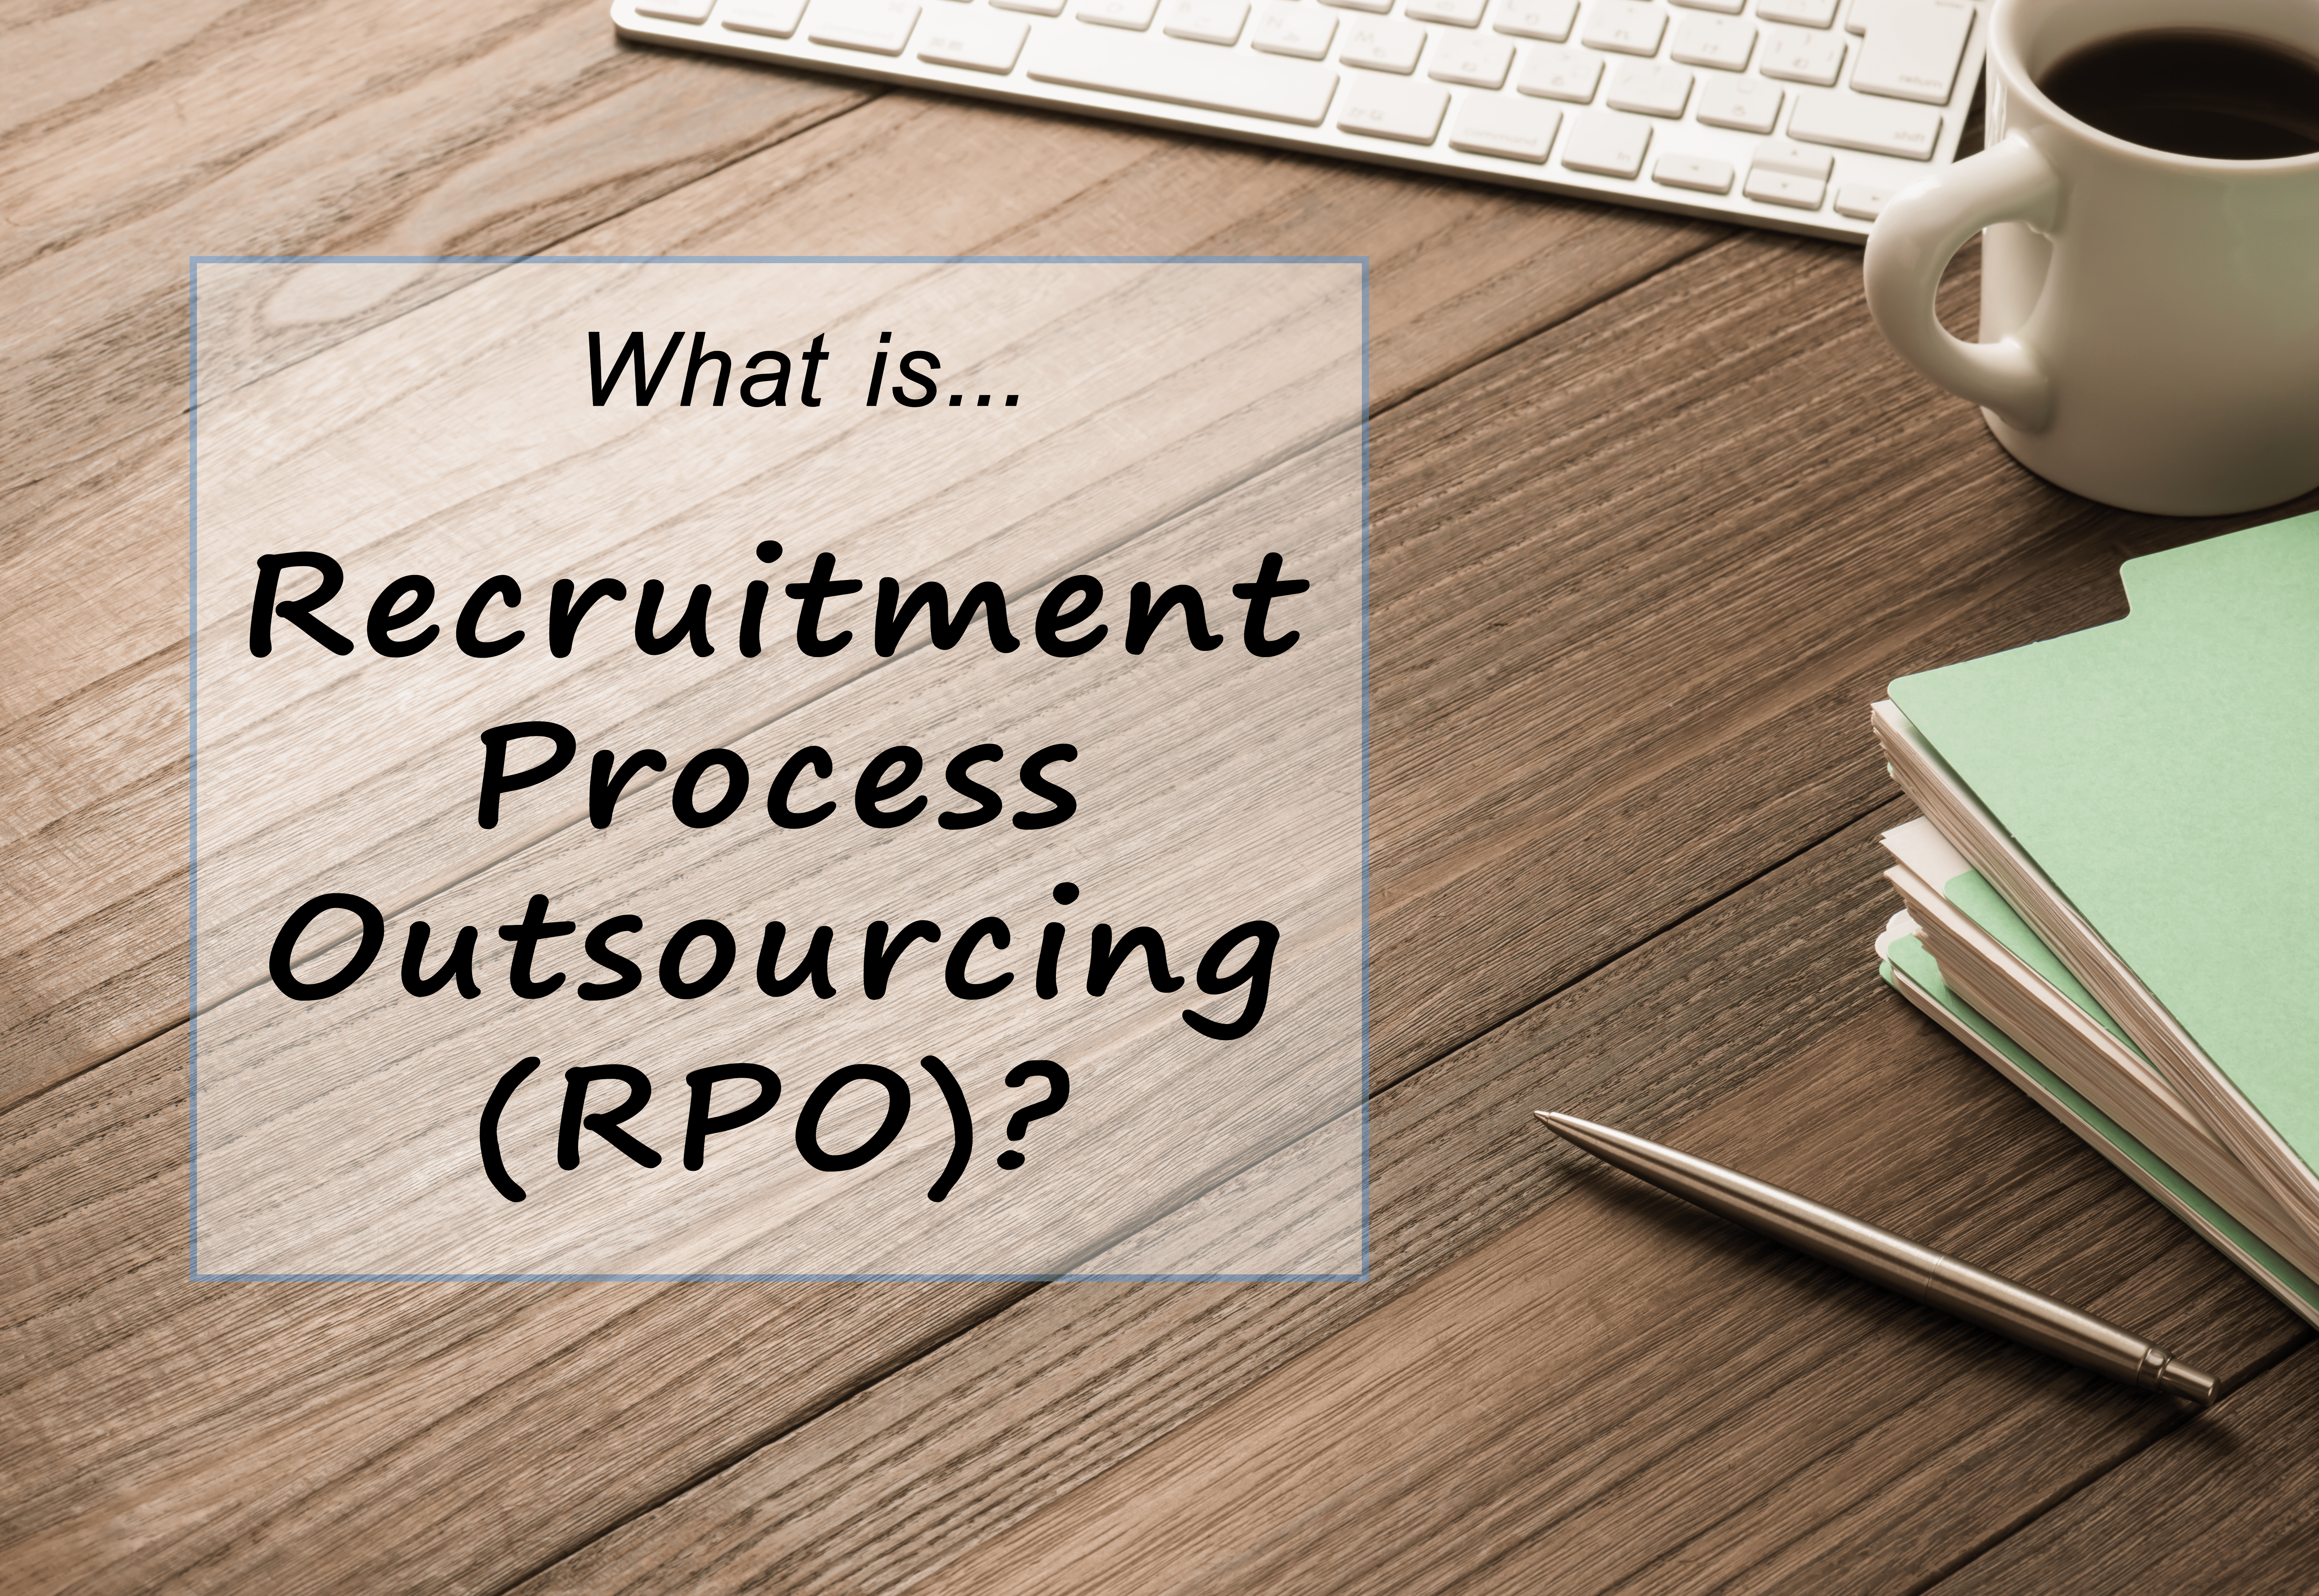 Video: What is RPO (Recruitment Process Outsourcing)?